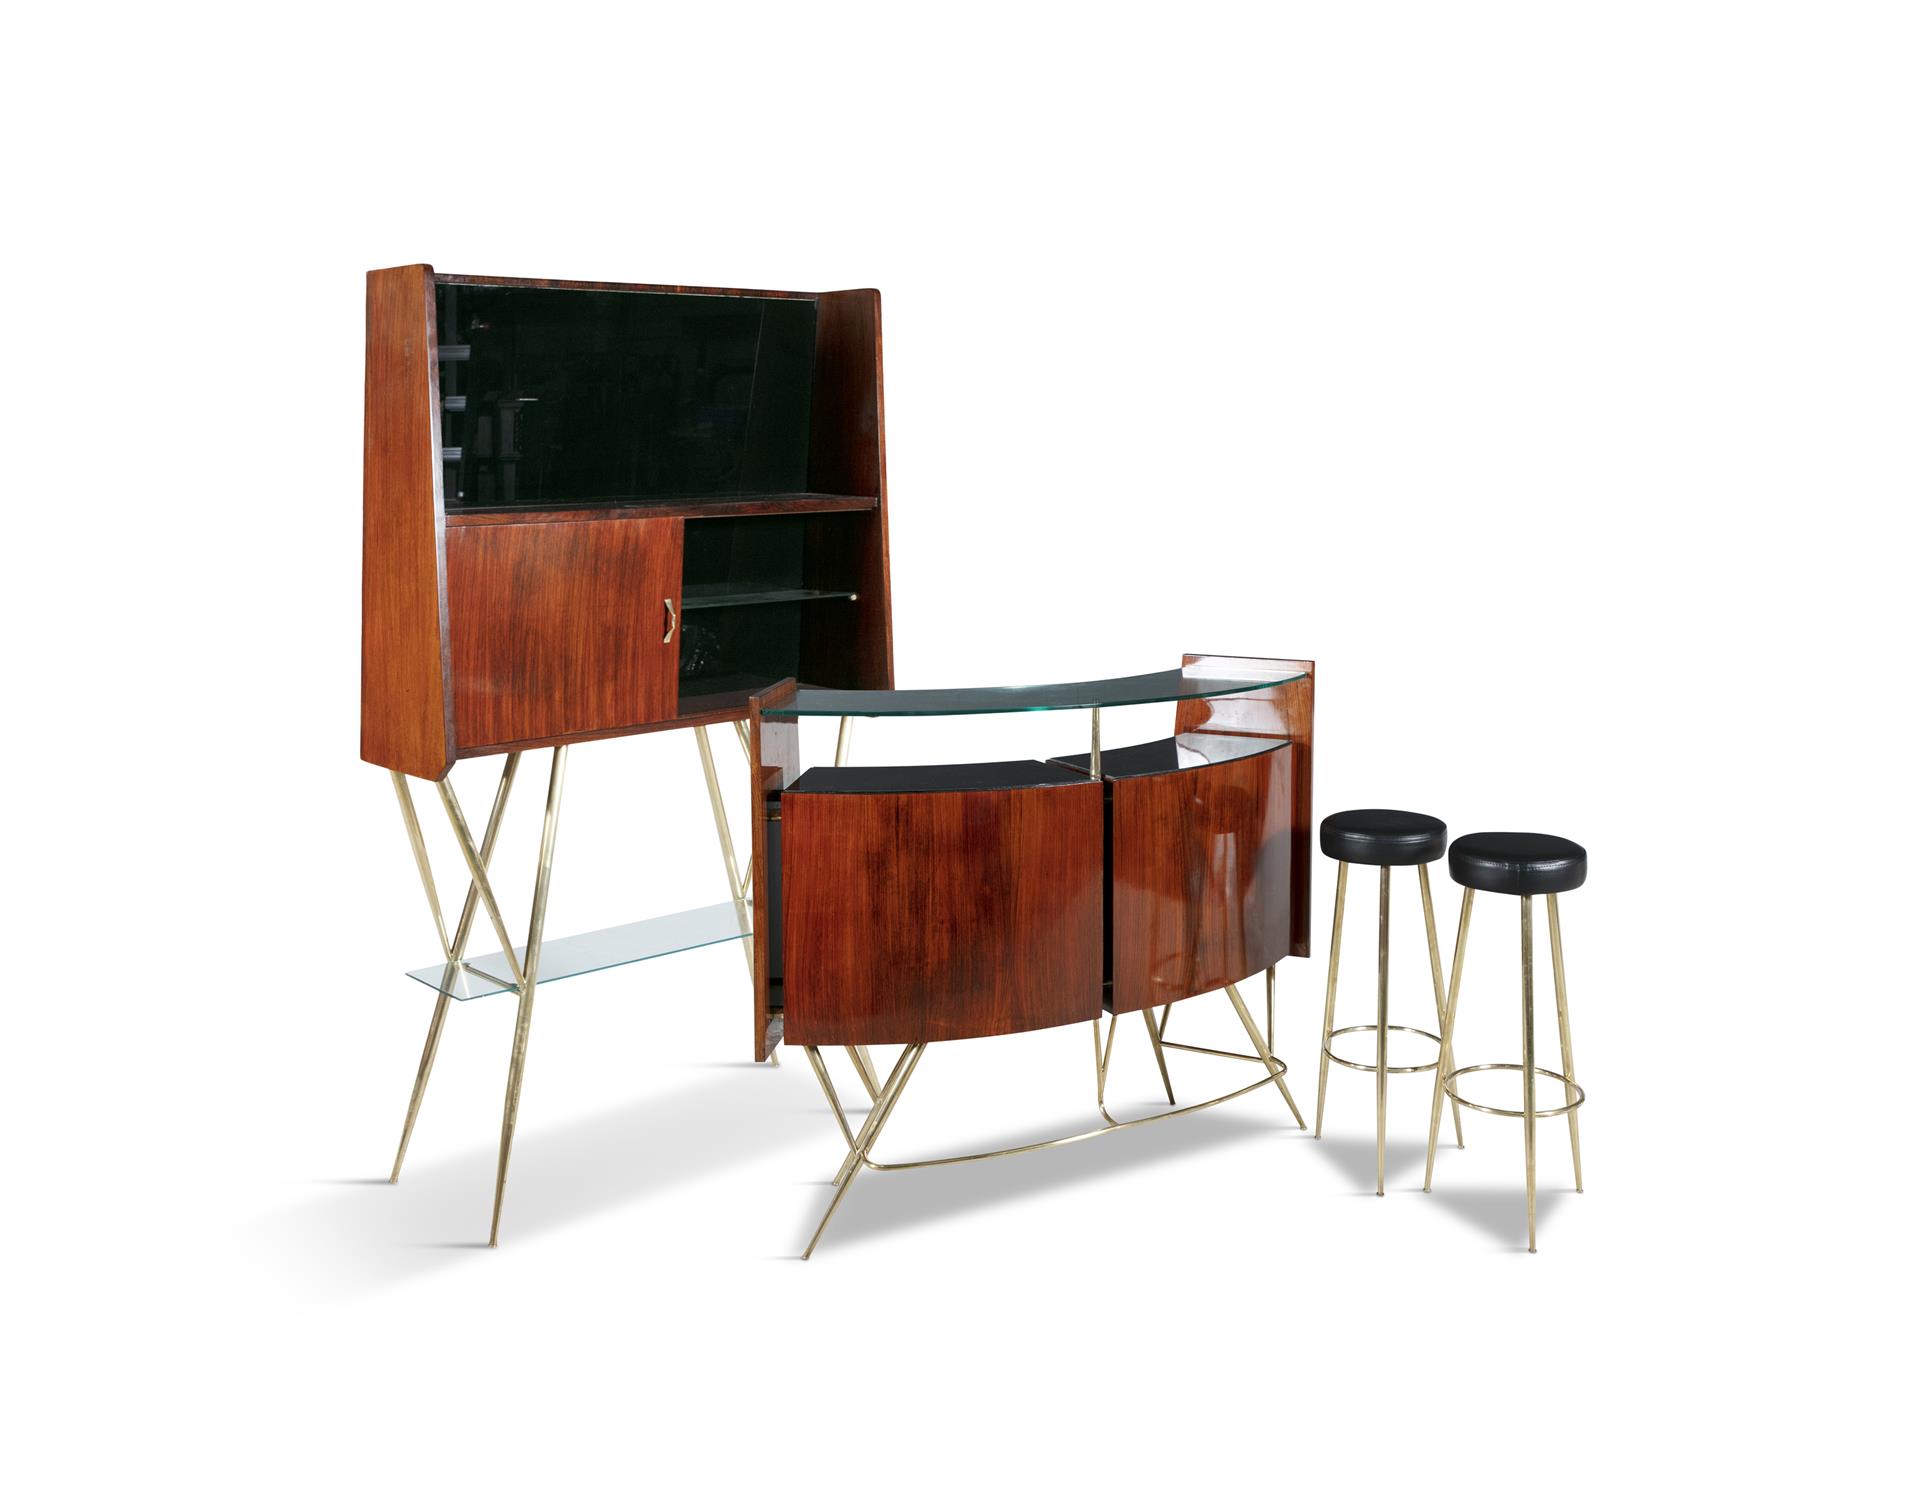 BAR SET A rosewood and brass bar set, complete with two stools and a curved glass top, Italy c. - Image 6 of 14